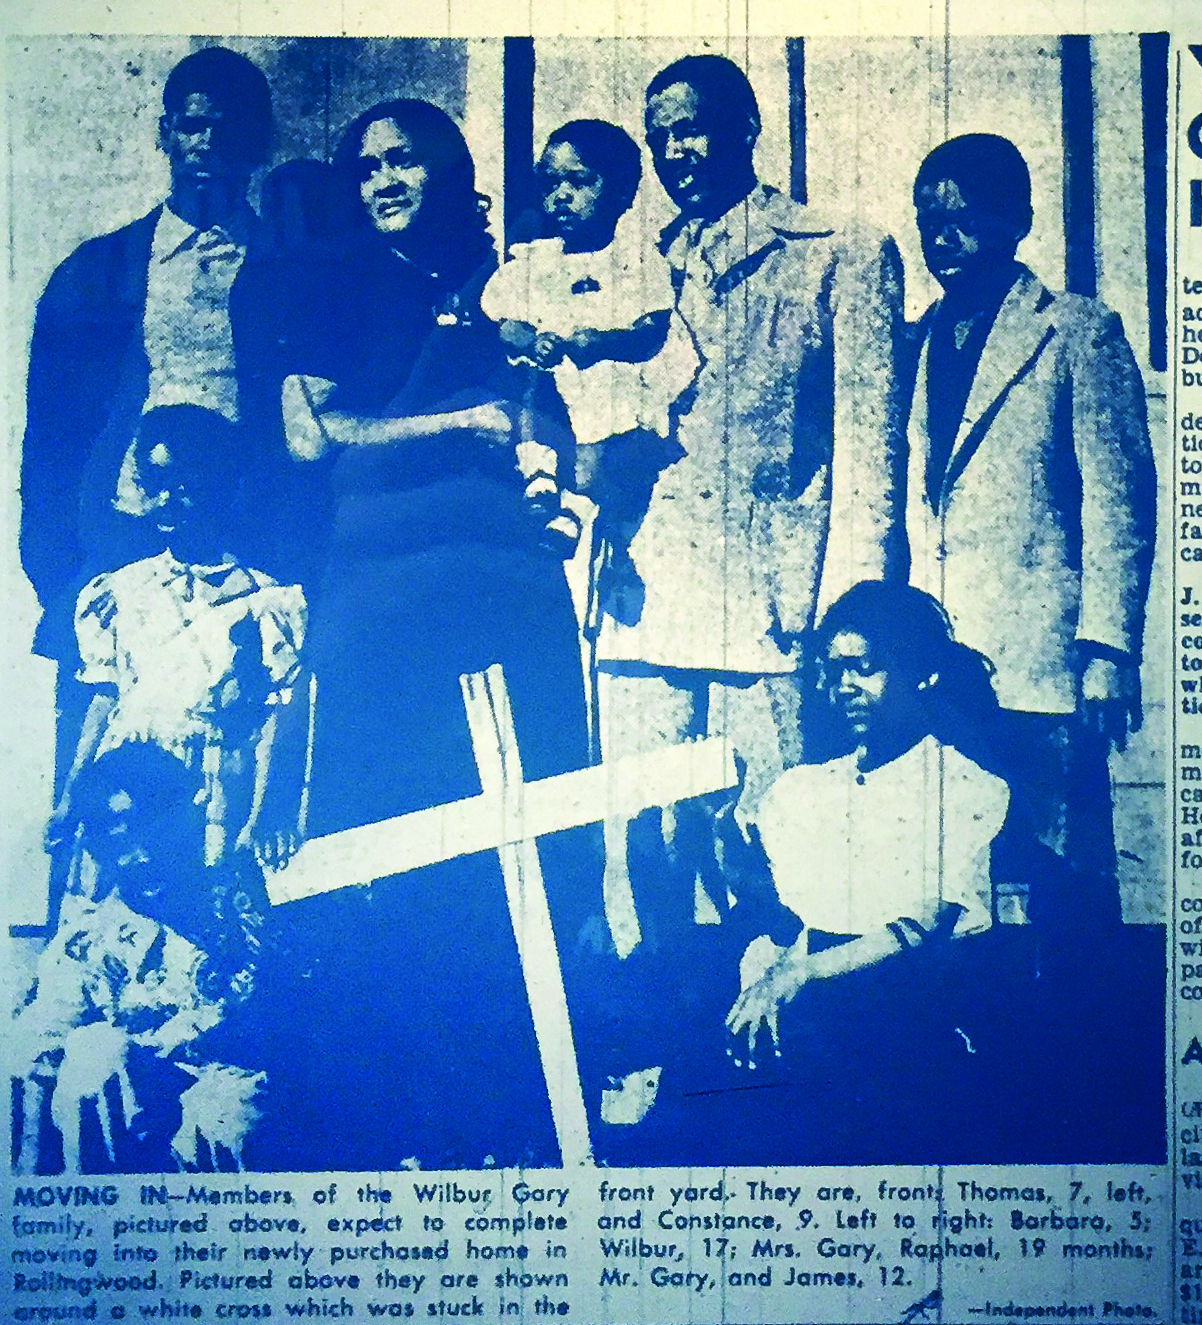 photo: The Gary family stands on their front yard at 2821 Brook Way with a white cross, a symbol the Ku Klux Klan used to terrorize them from moving into the Rollingwood subdivision in San Pablo, which historically prohibited the selling of houses to African Americans. Published in the Richmond Independent, 1952.